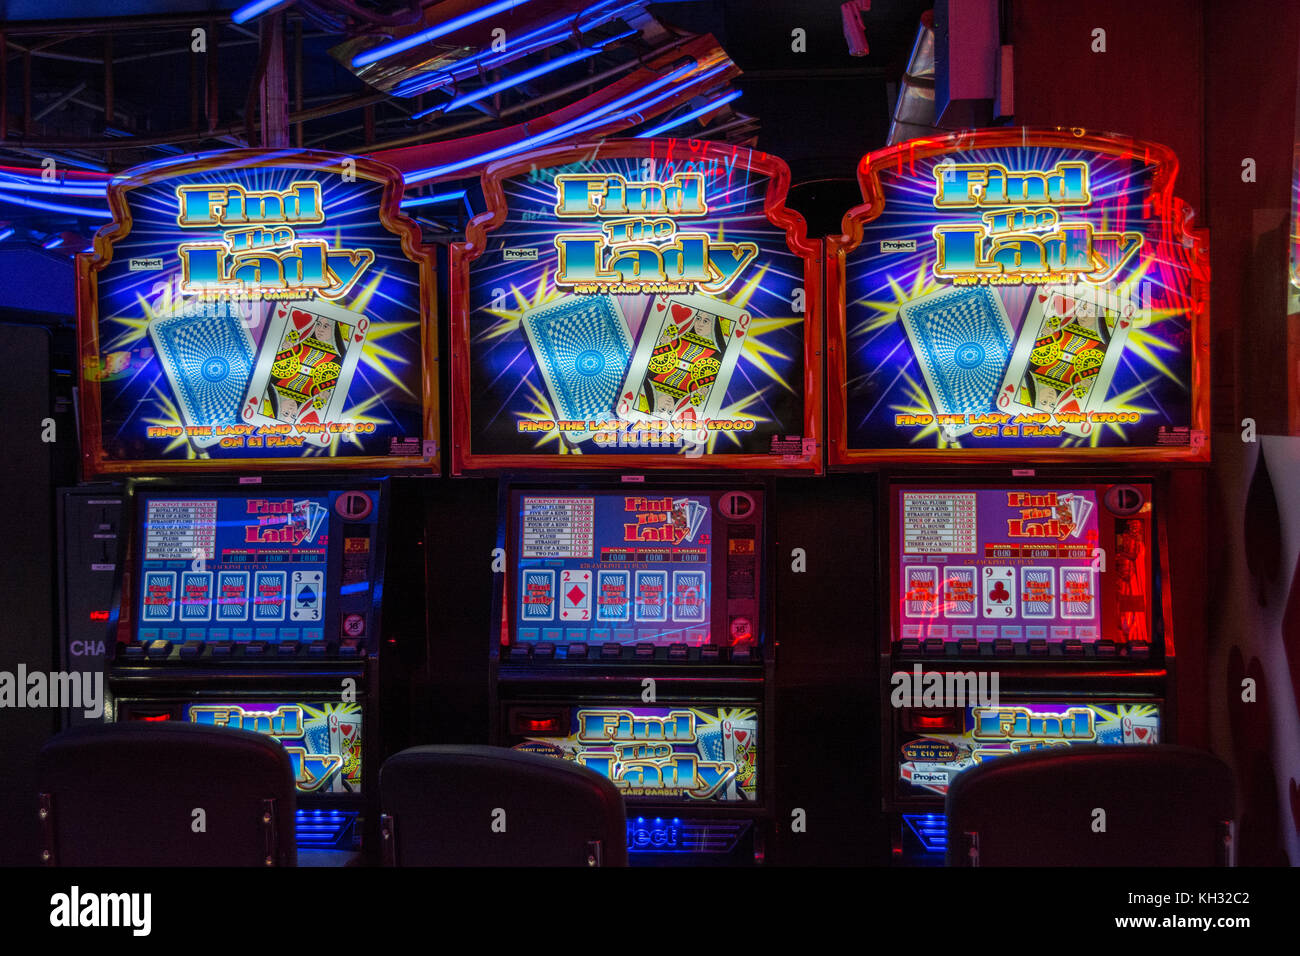 Find the Lady slot machines in an amusement arcade in Chinatown in London's West End, England, UK Stock Photo